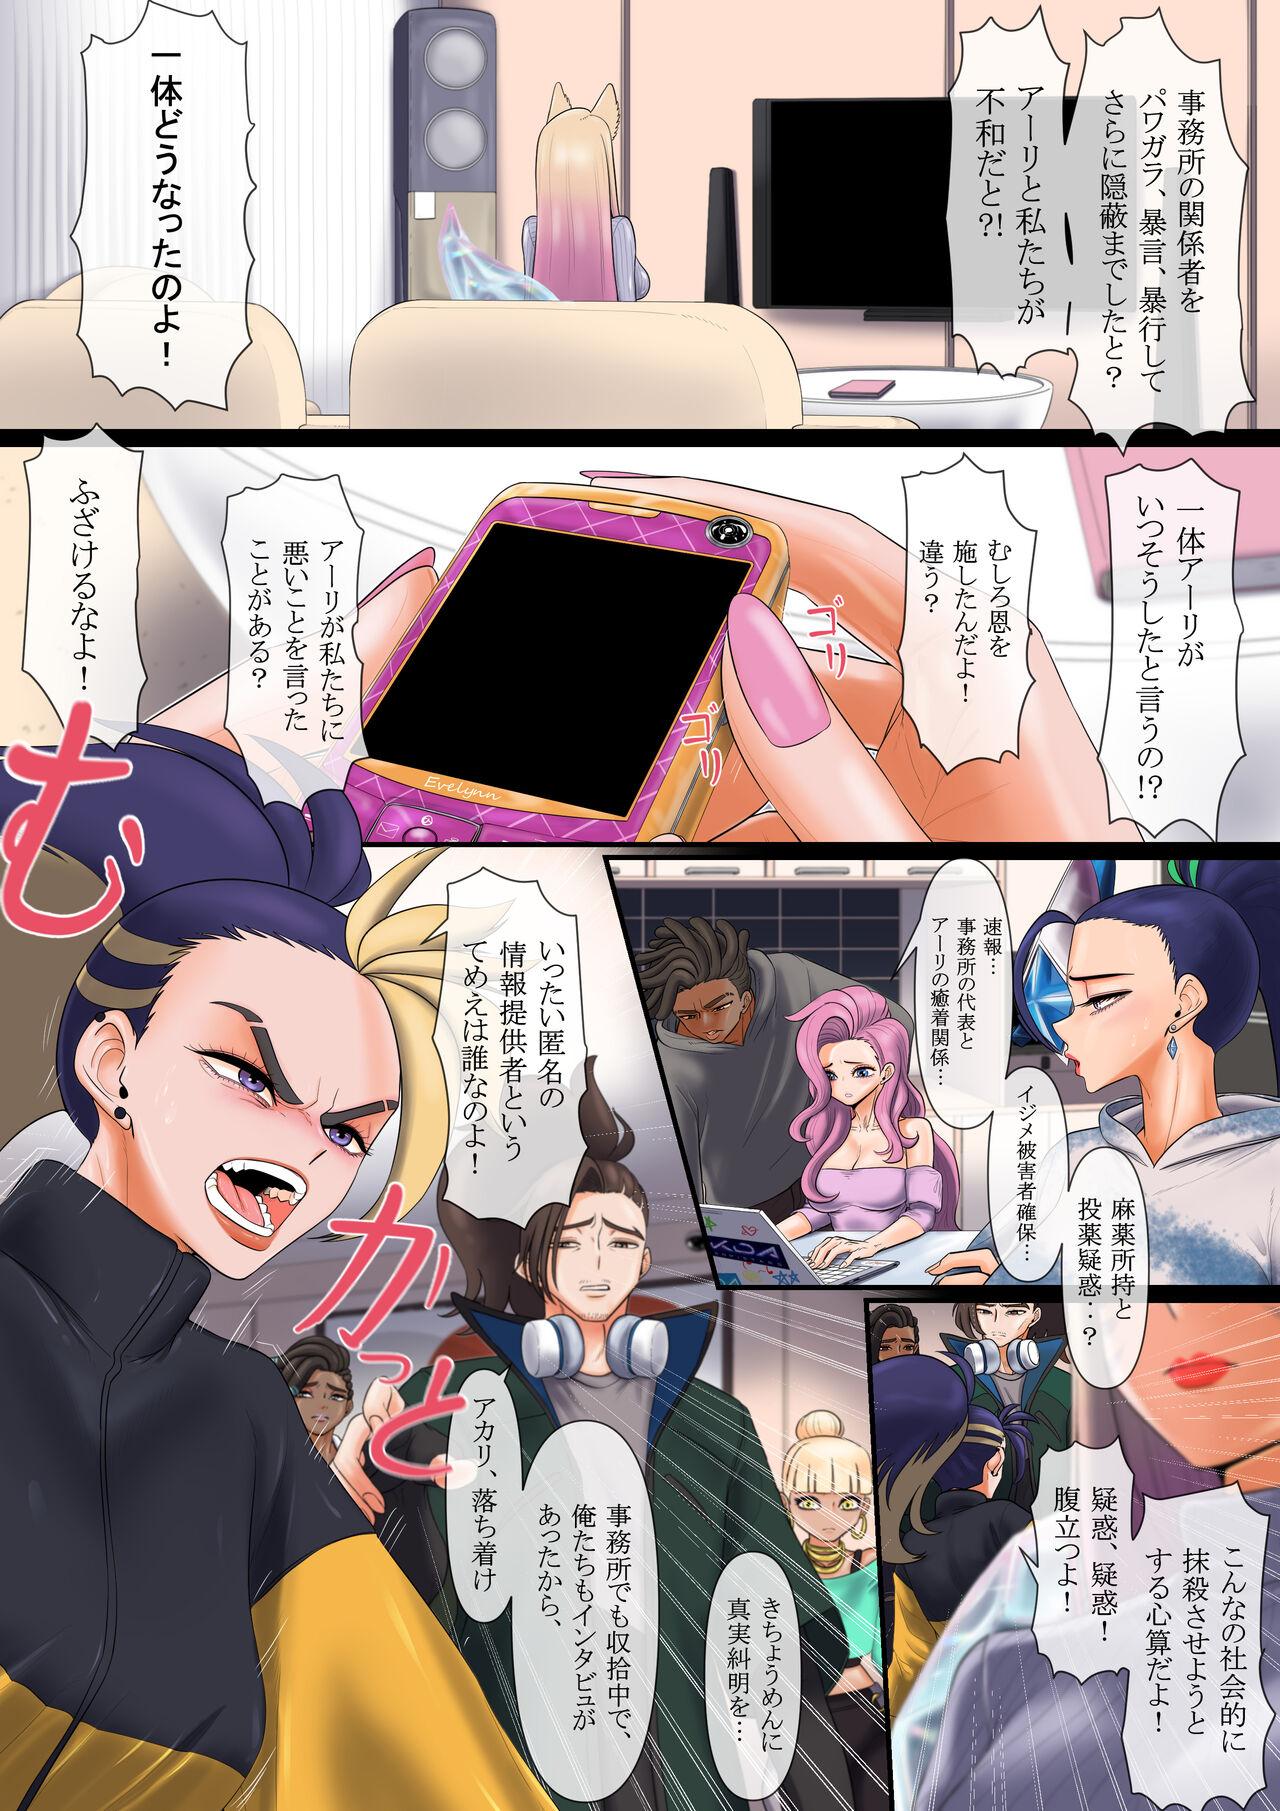 Horny 守りたいもの... - League of legends Family - Page 2